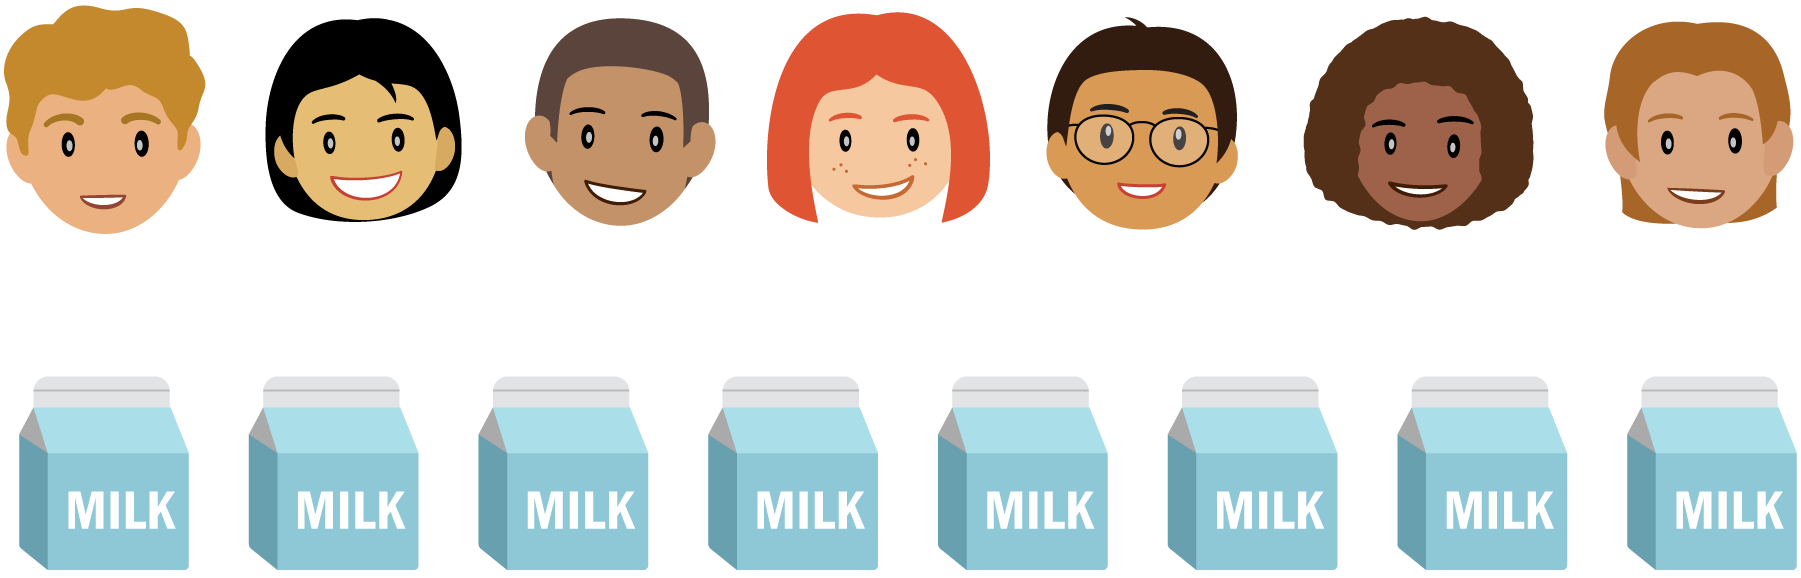 Image of Students and cartoons of milk.